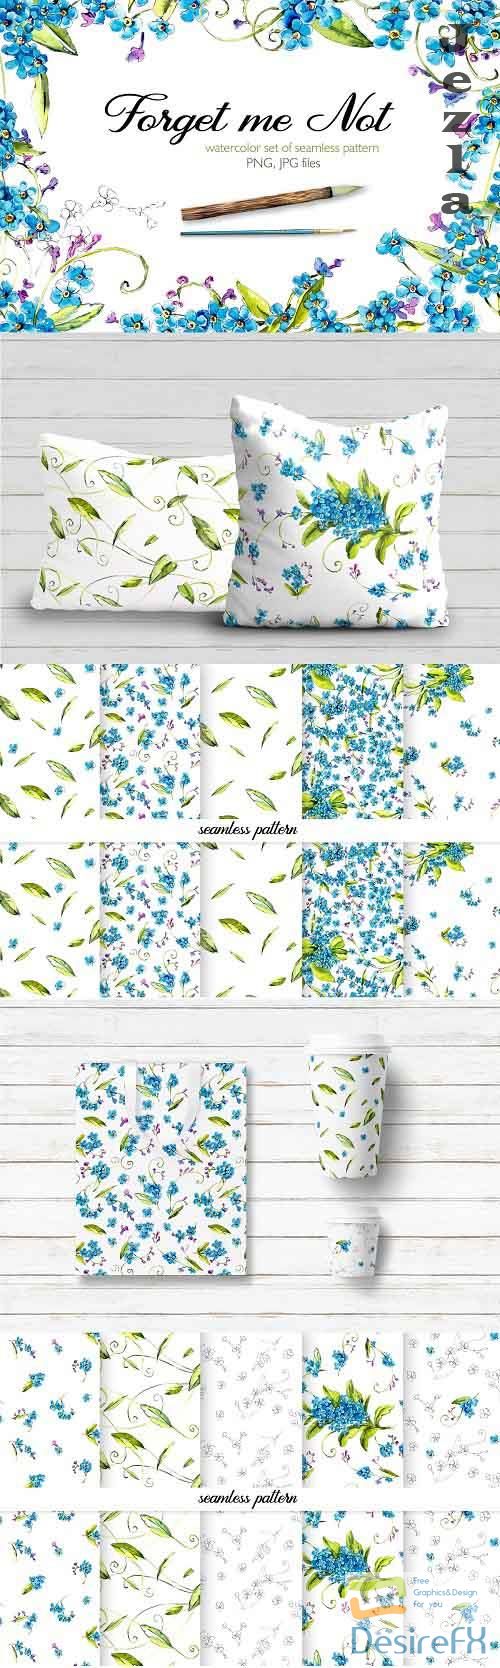 Seamless pattern of forget-me-not - 3816723